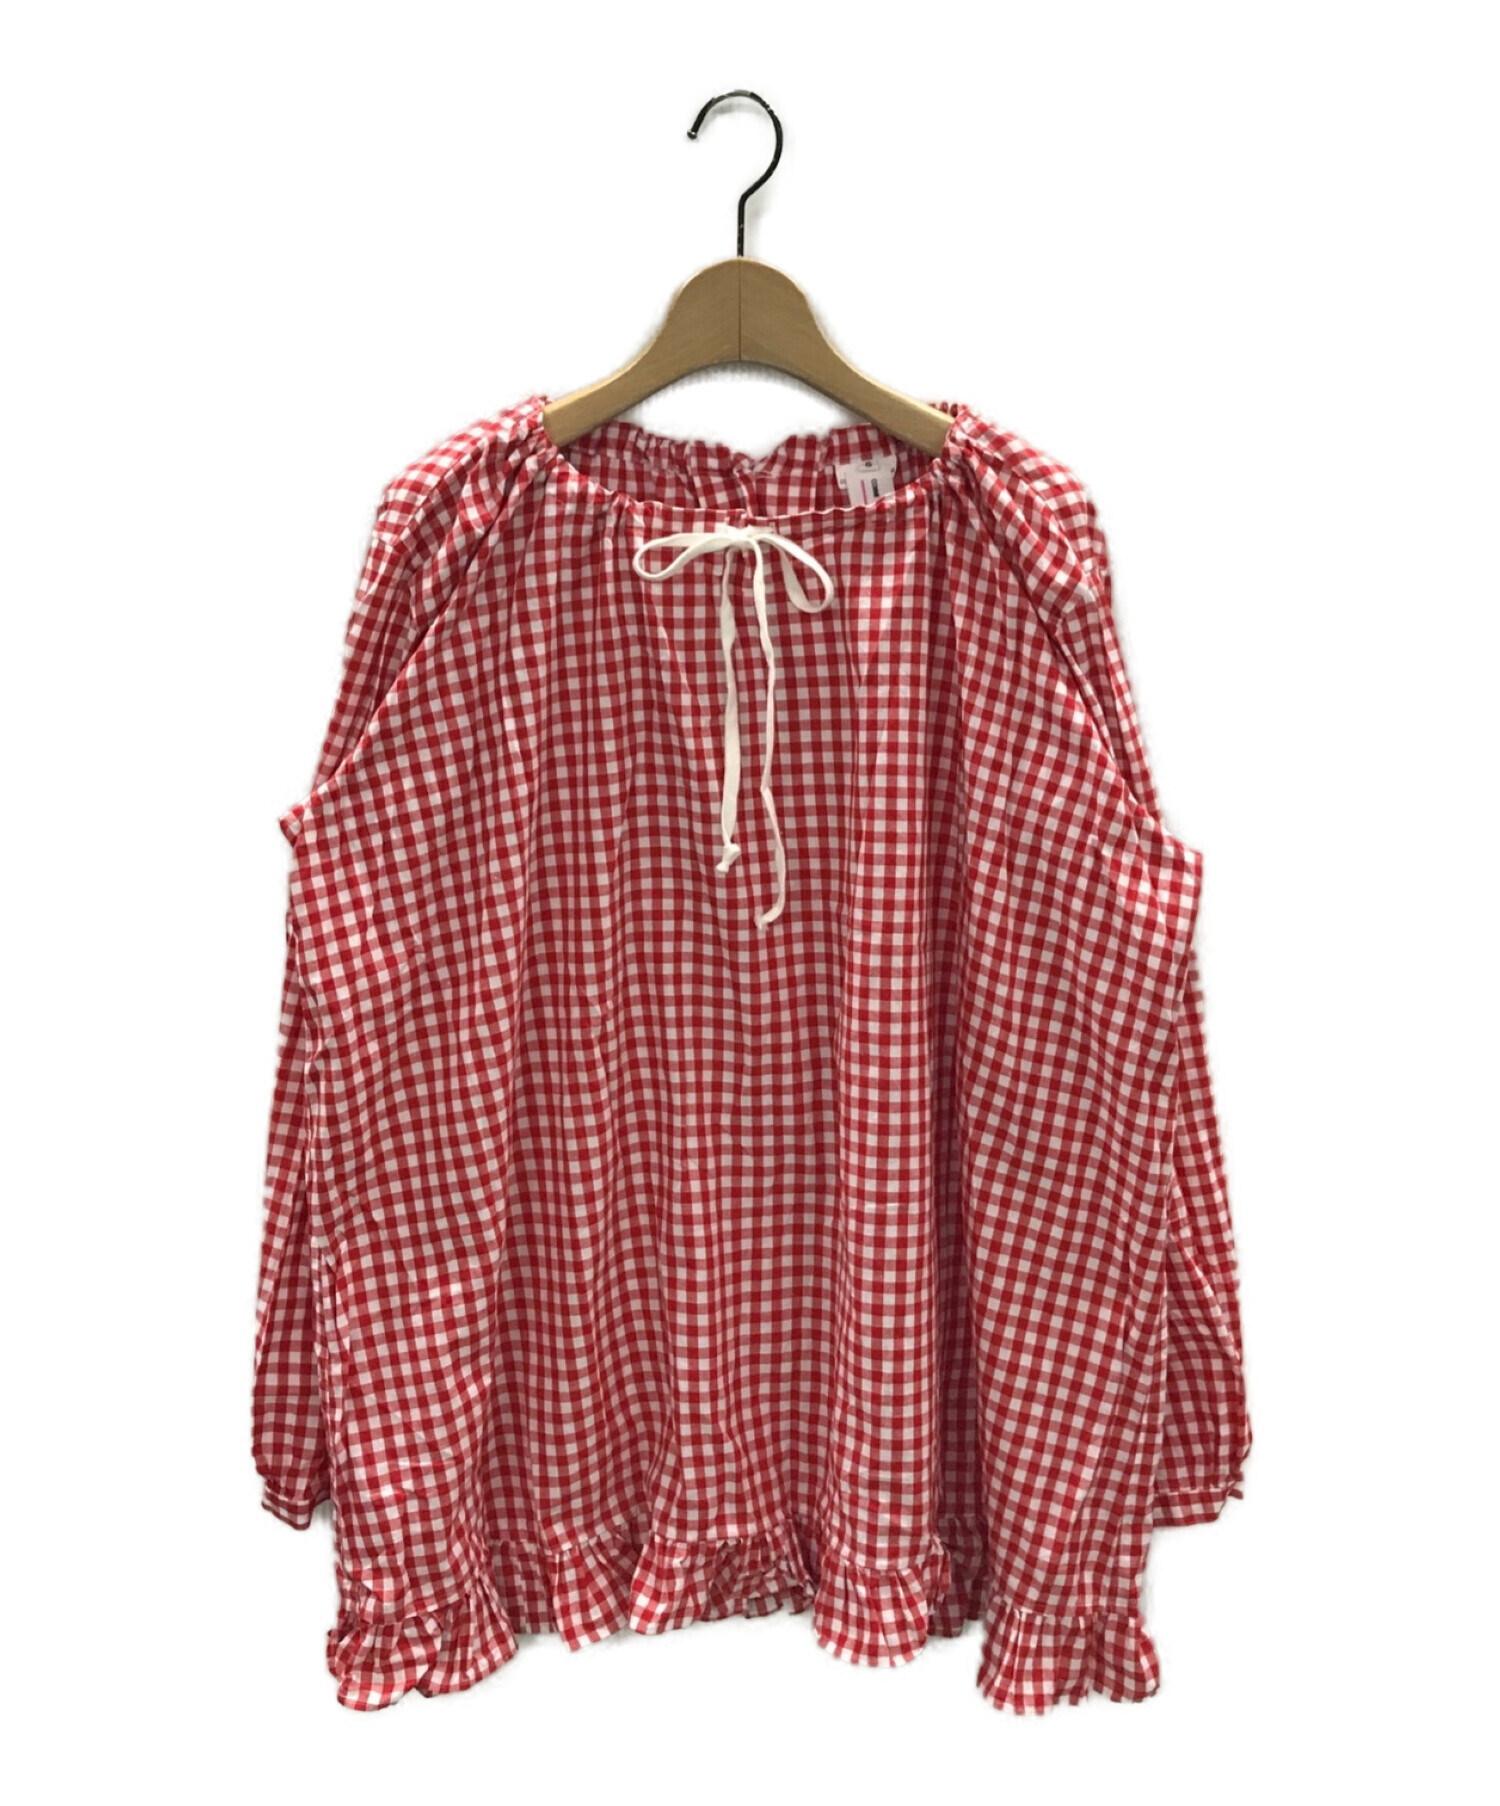 COMME des GARCONS GIRL 赤ギンガムチェックシーズン2021SS